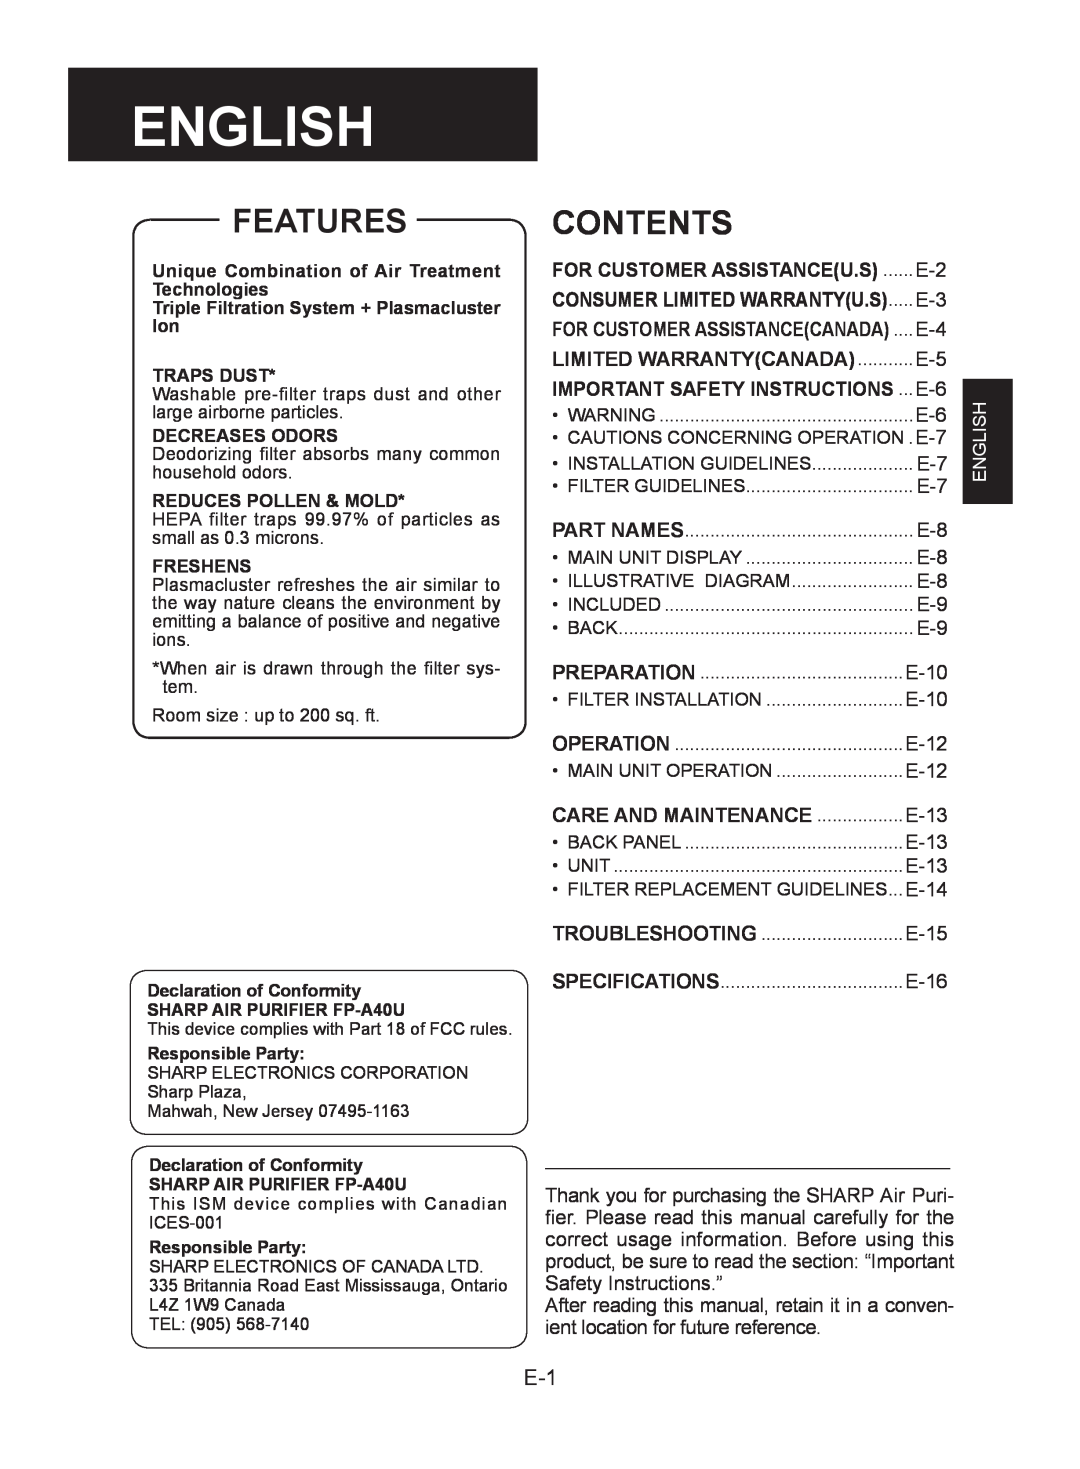 Sharp FP-A40UW, FP-A40C operation manual English, Features, Contents, LIMITED WARRANTYCANADA...........E-5 